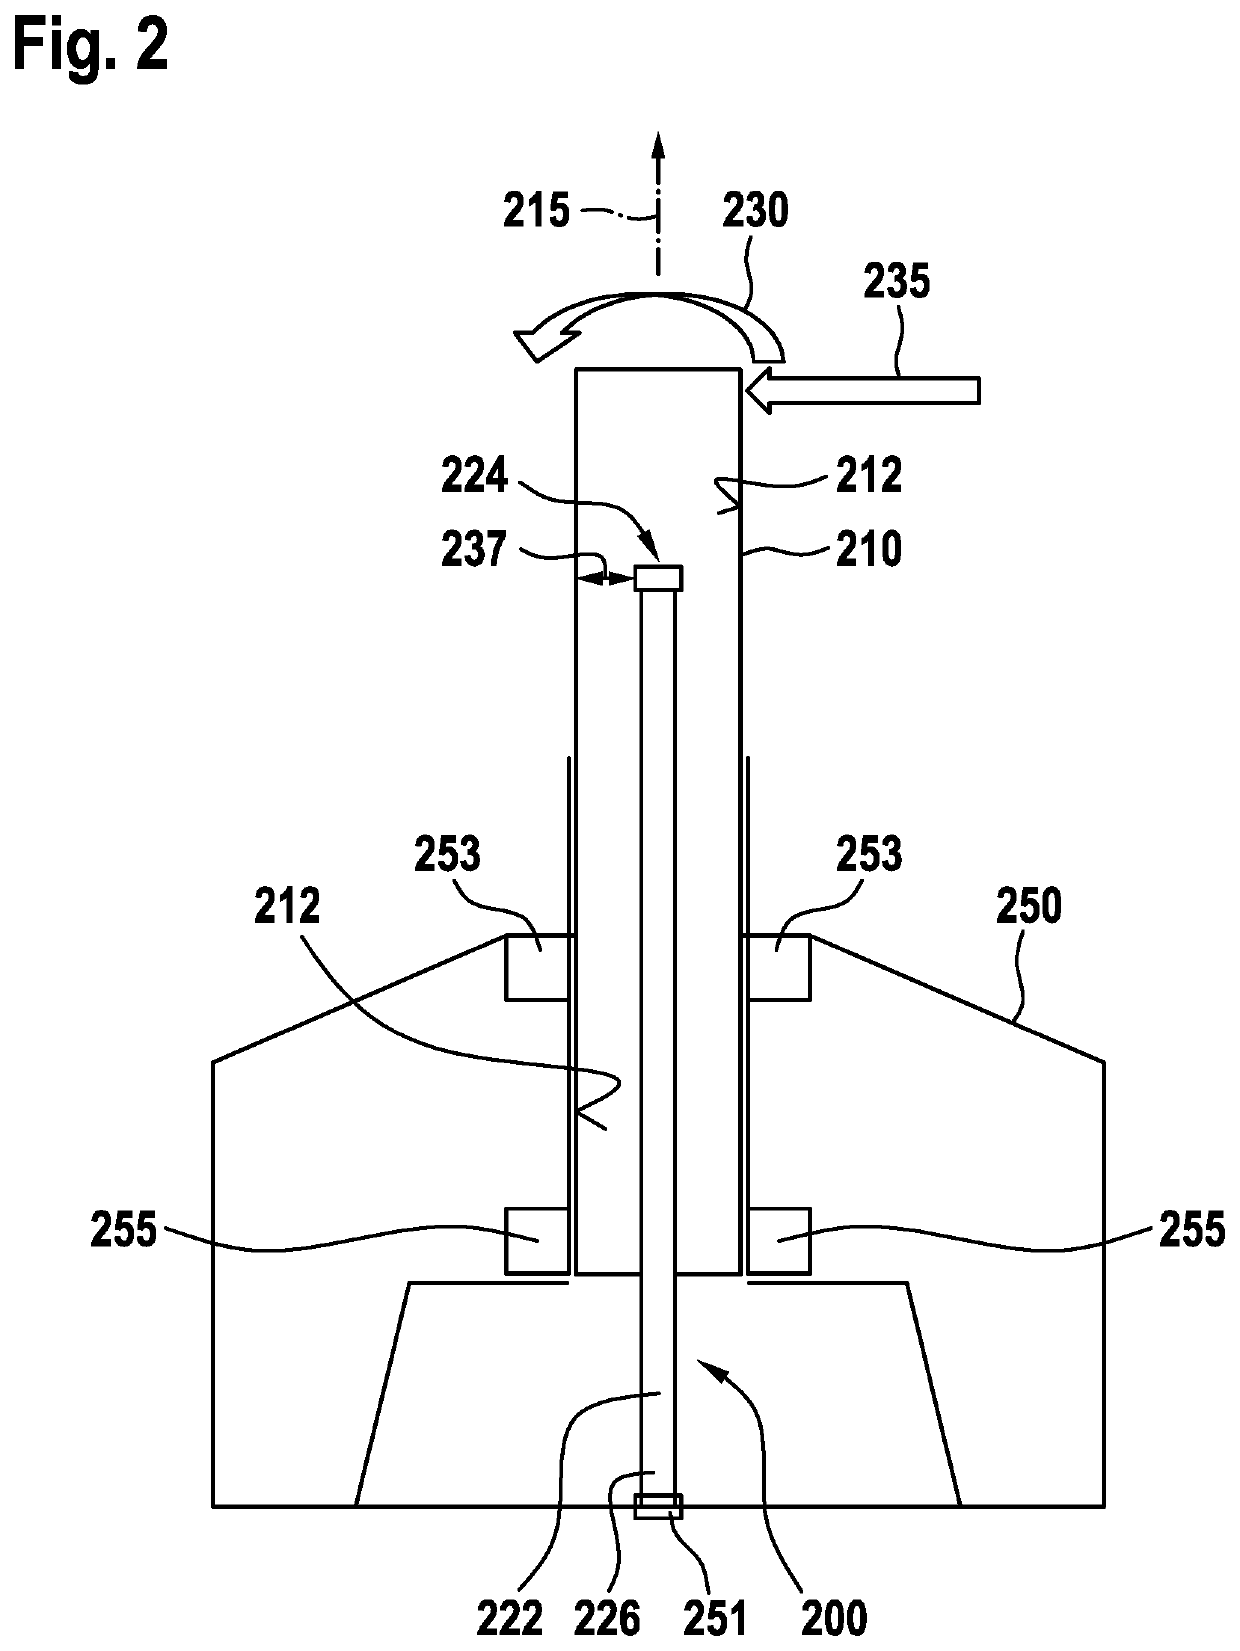 Measurement apparatus for determining a bending moment